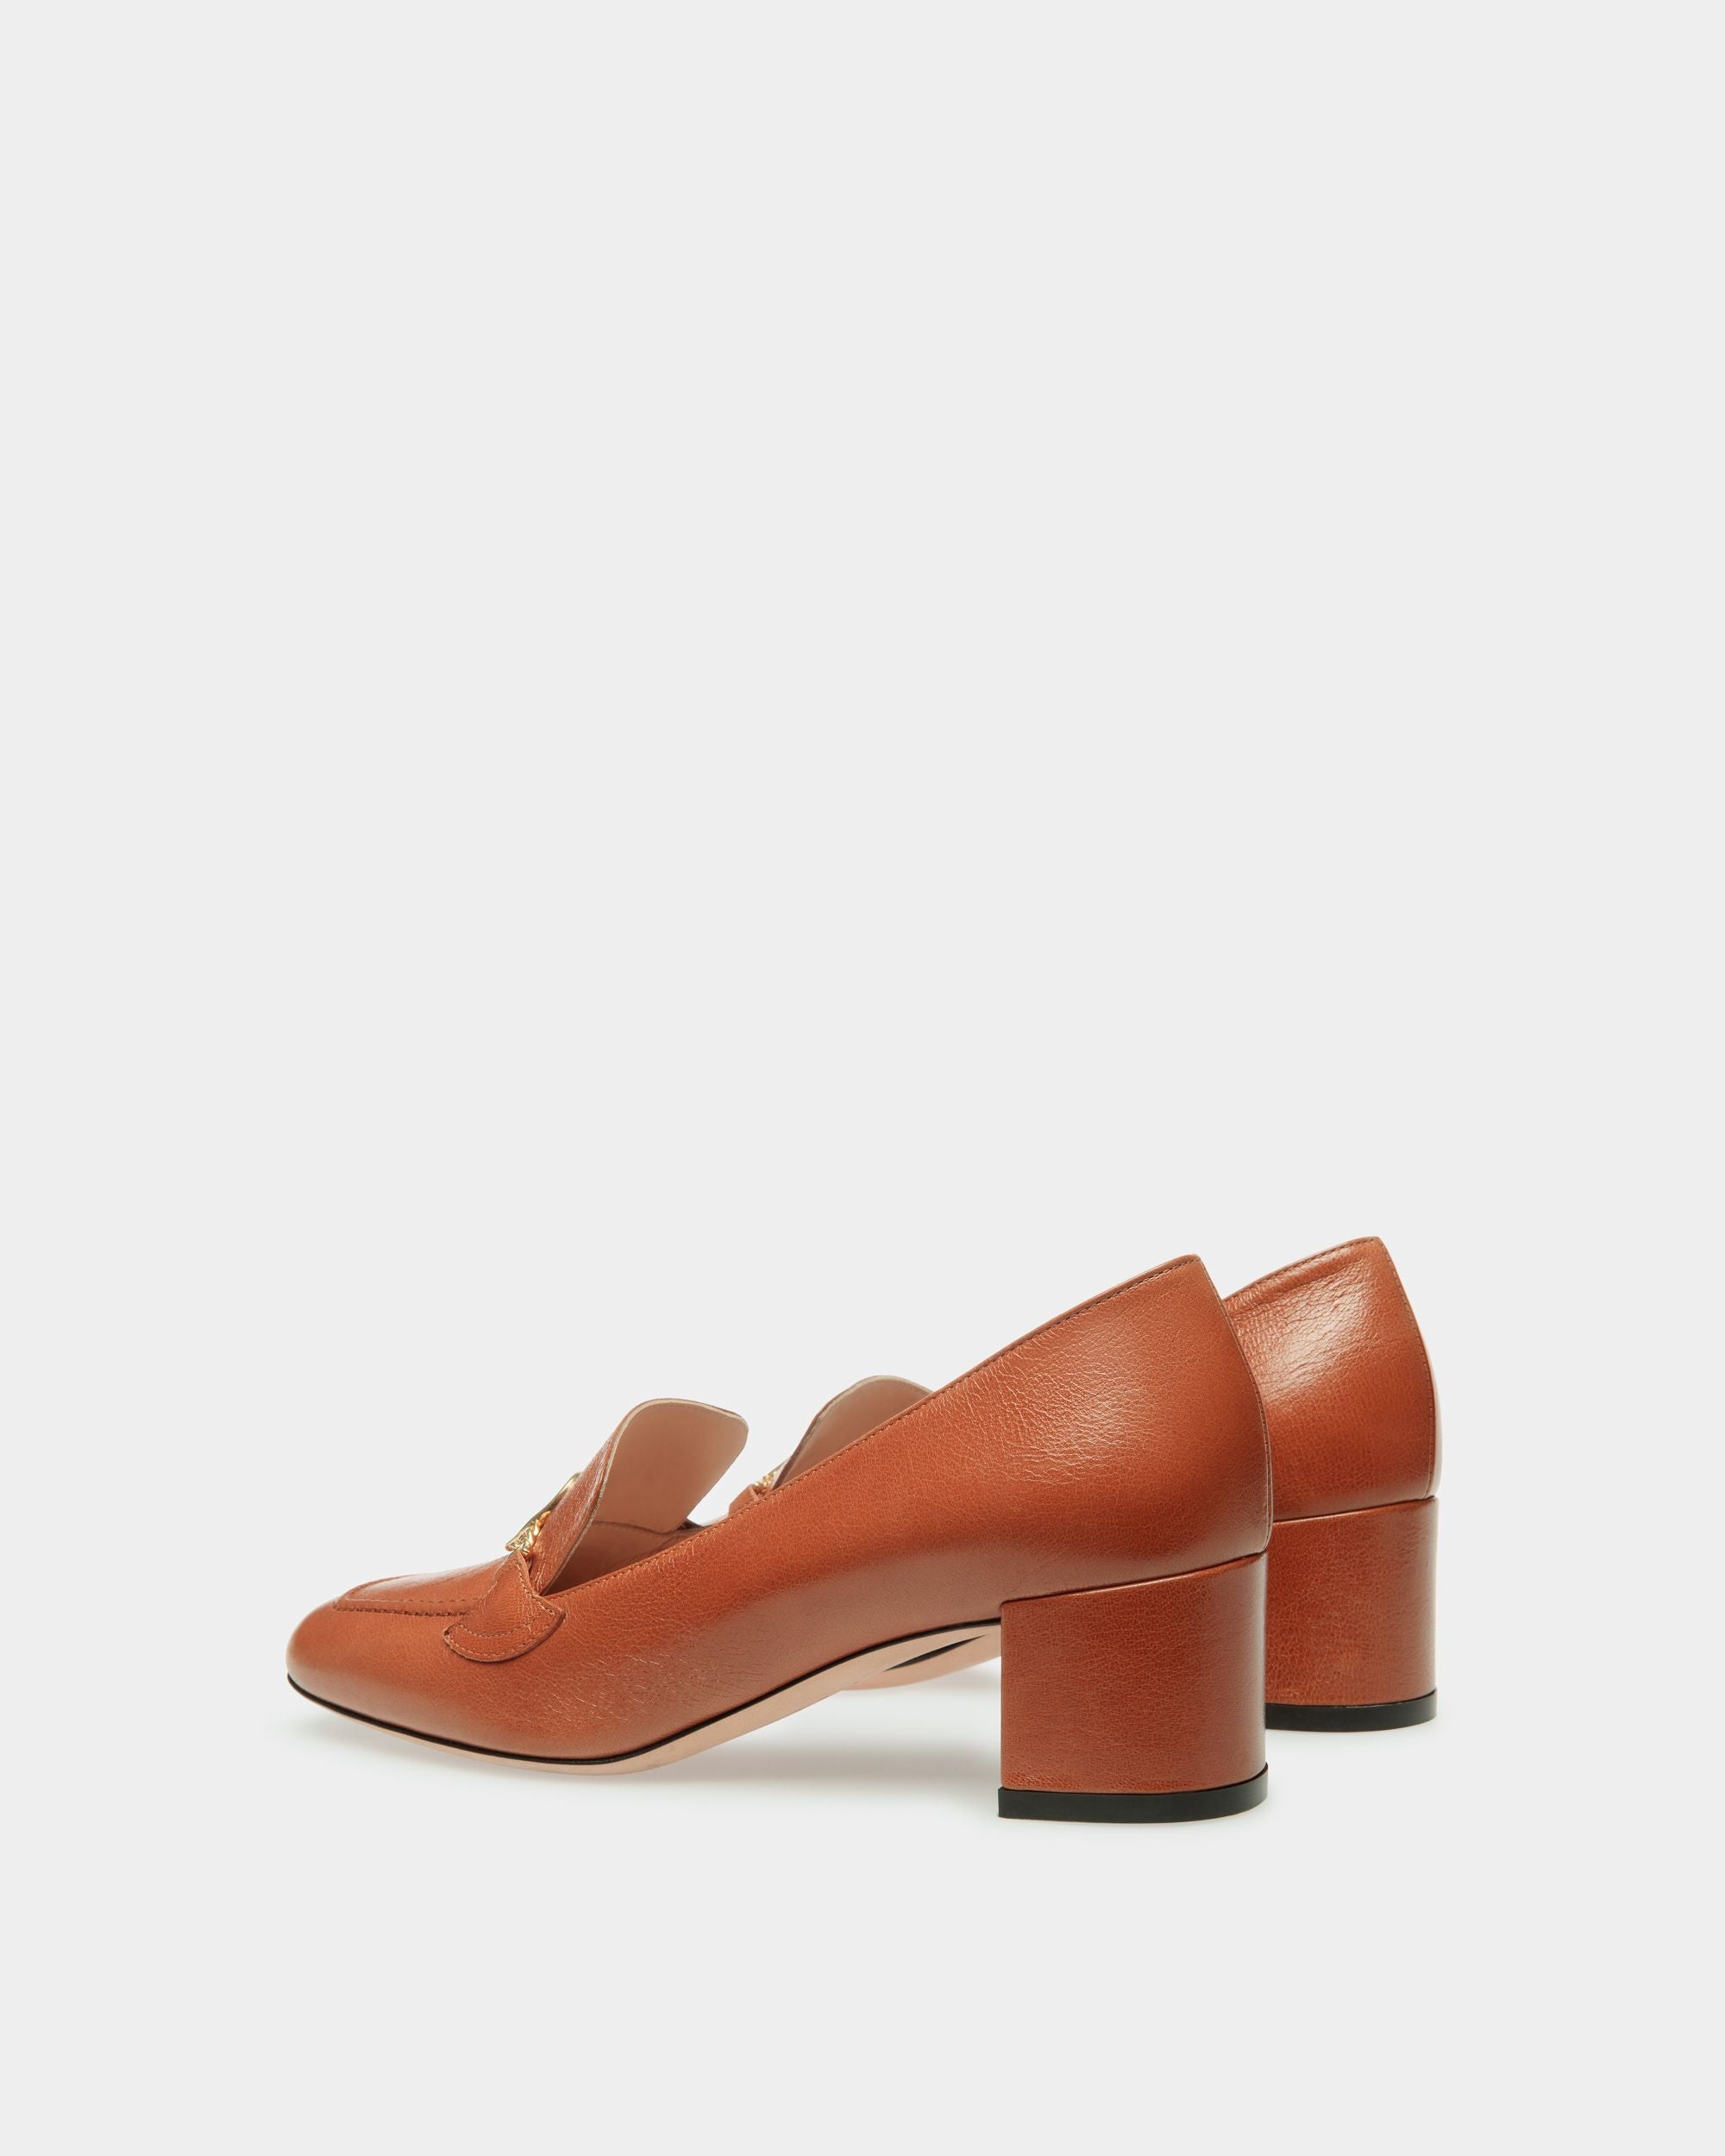 Obrien | Women's Pumps | Brown Leather | Bally | Still Life 3/4 Back